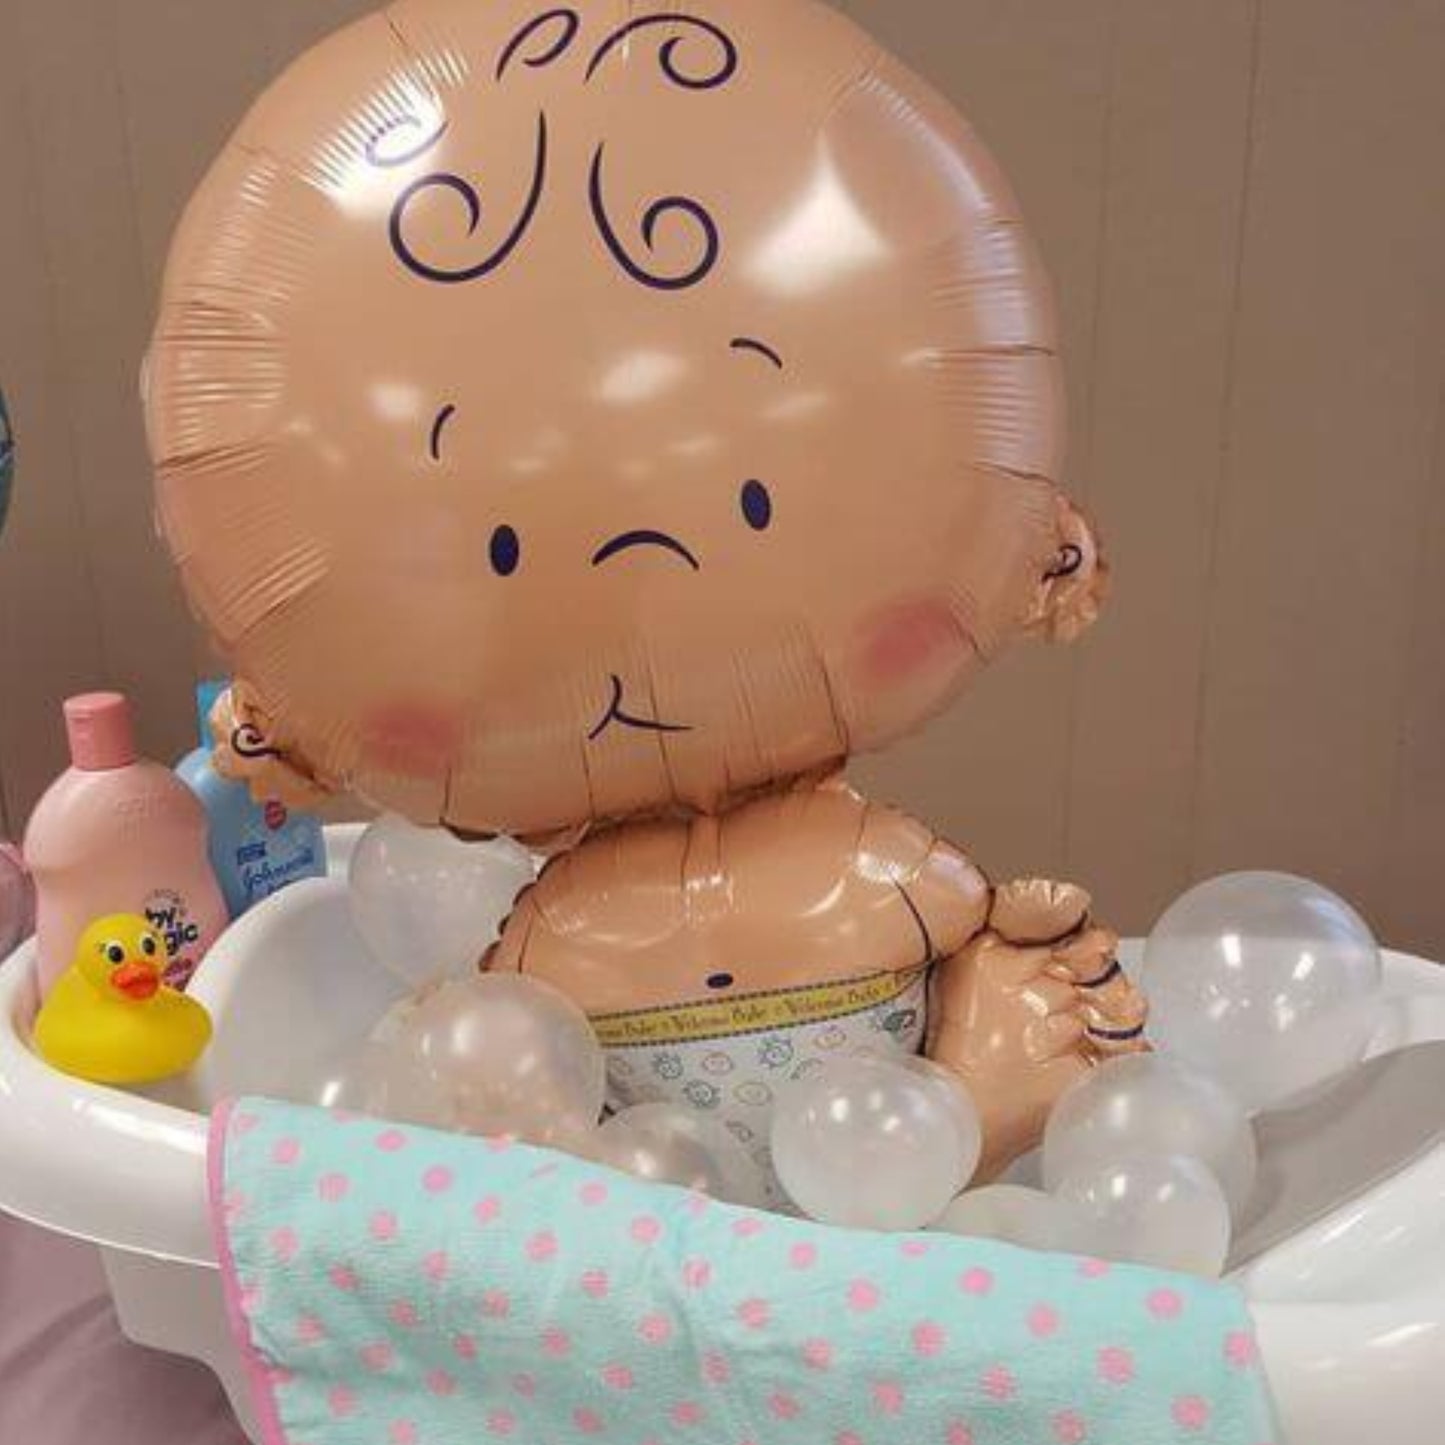 Sitting Baby Balloon Decoration Air-Fill